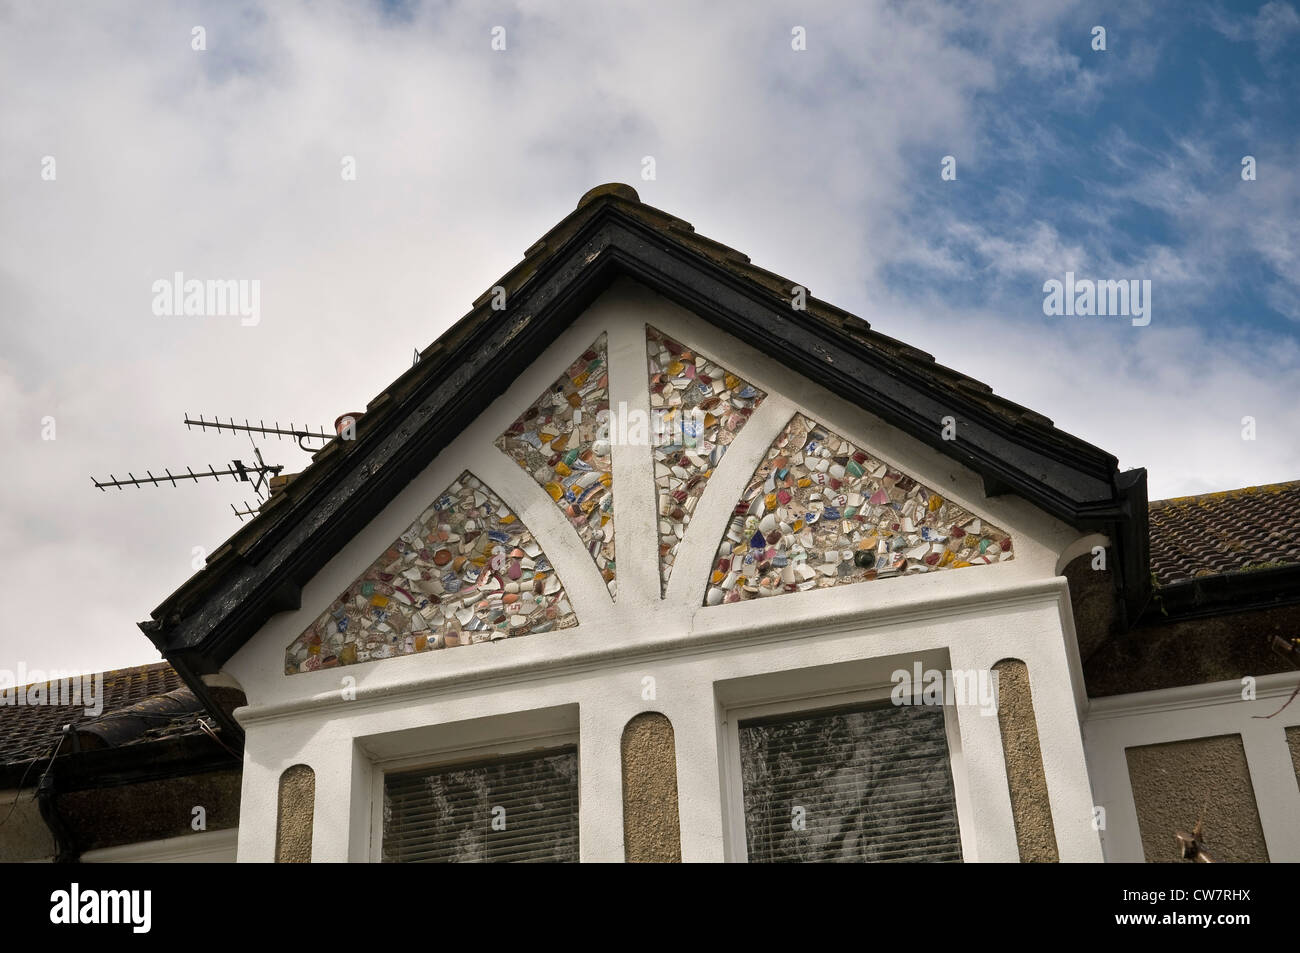 Unusual Edwardian house with gables decorated with broken pieces of ceramic crockery in Worthing, West Sussex, UK Stock Photo